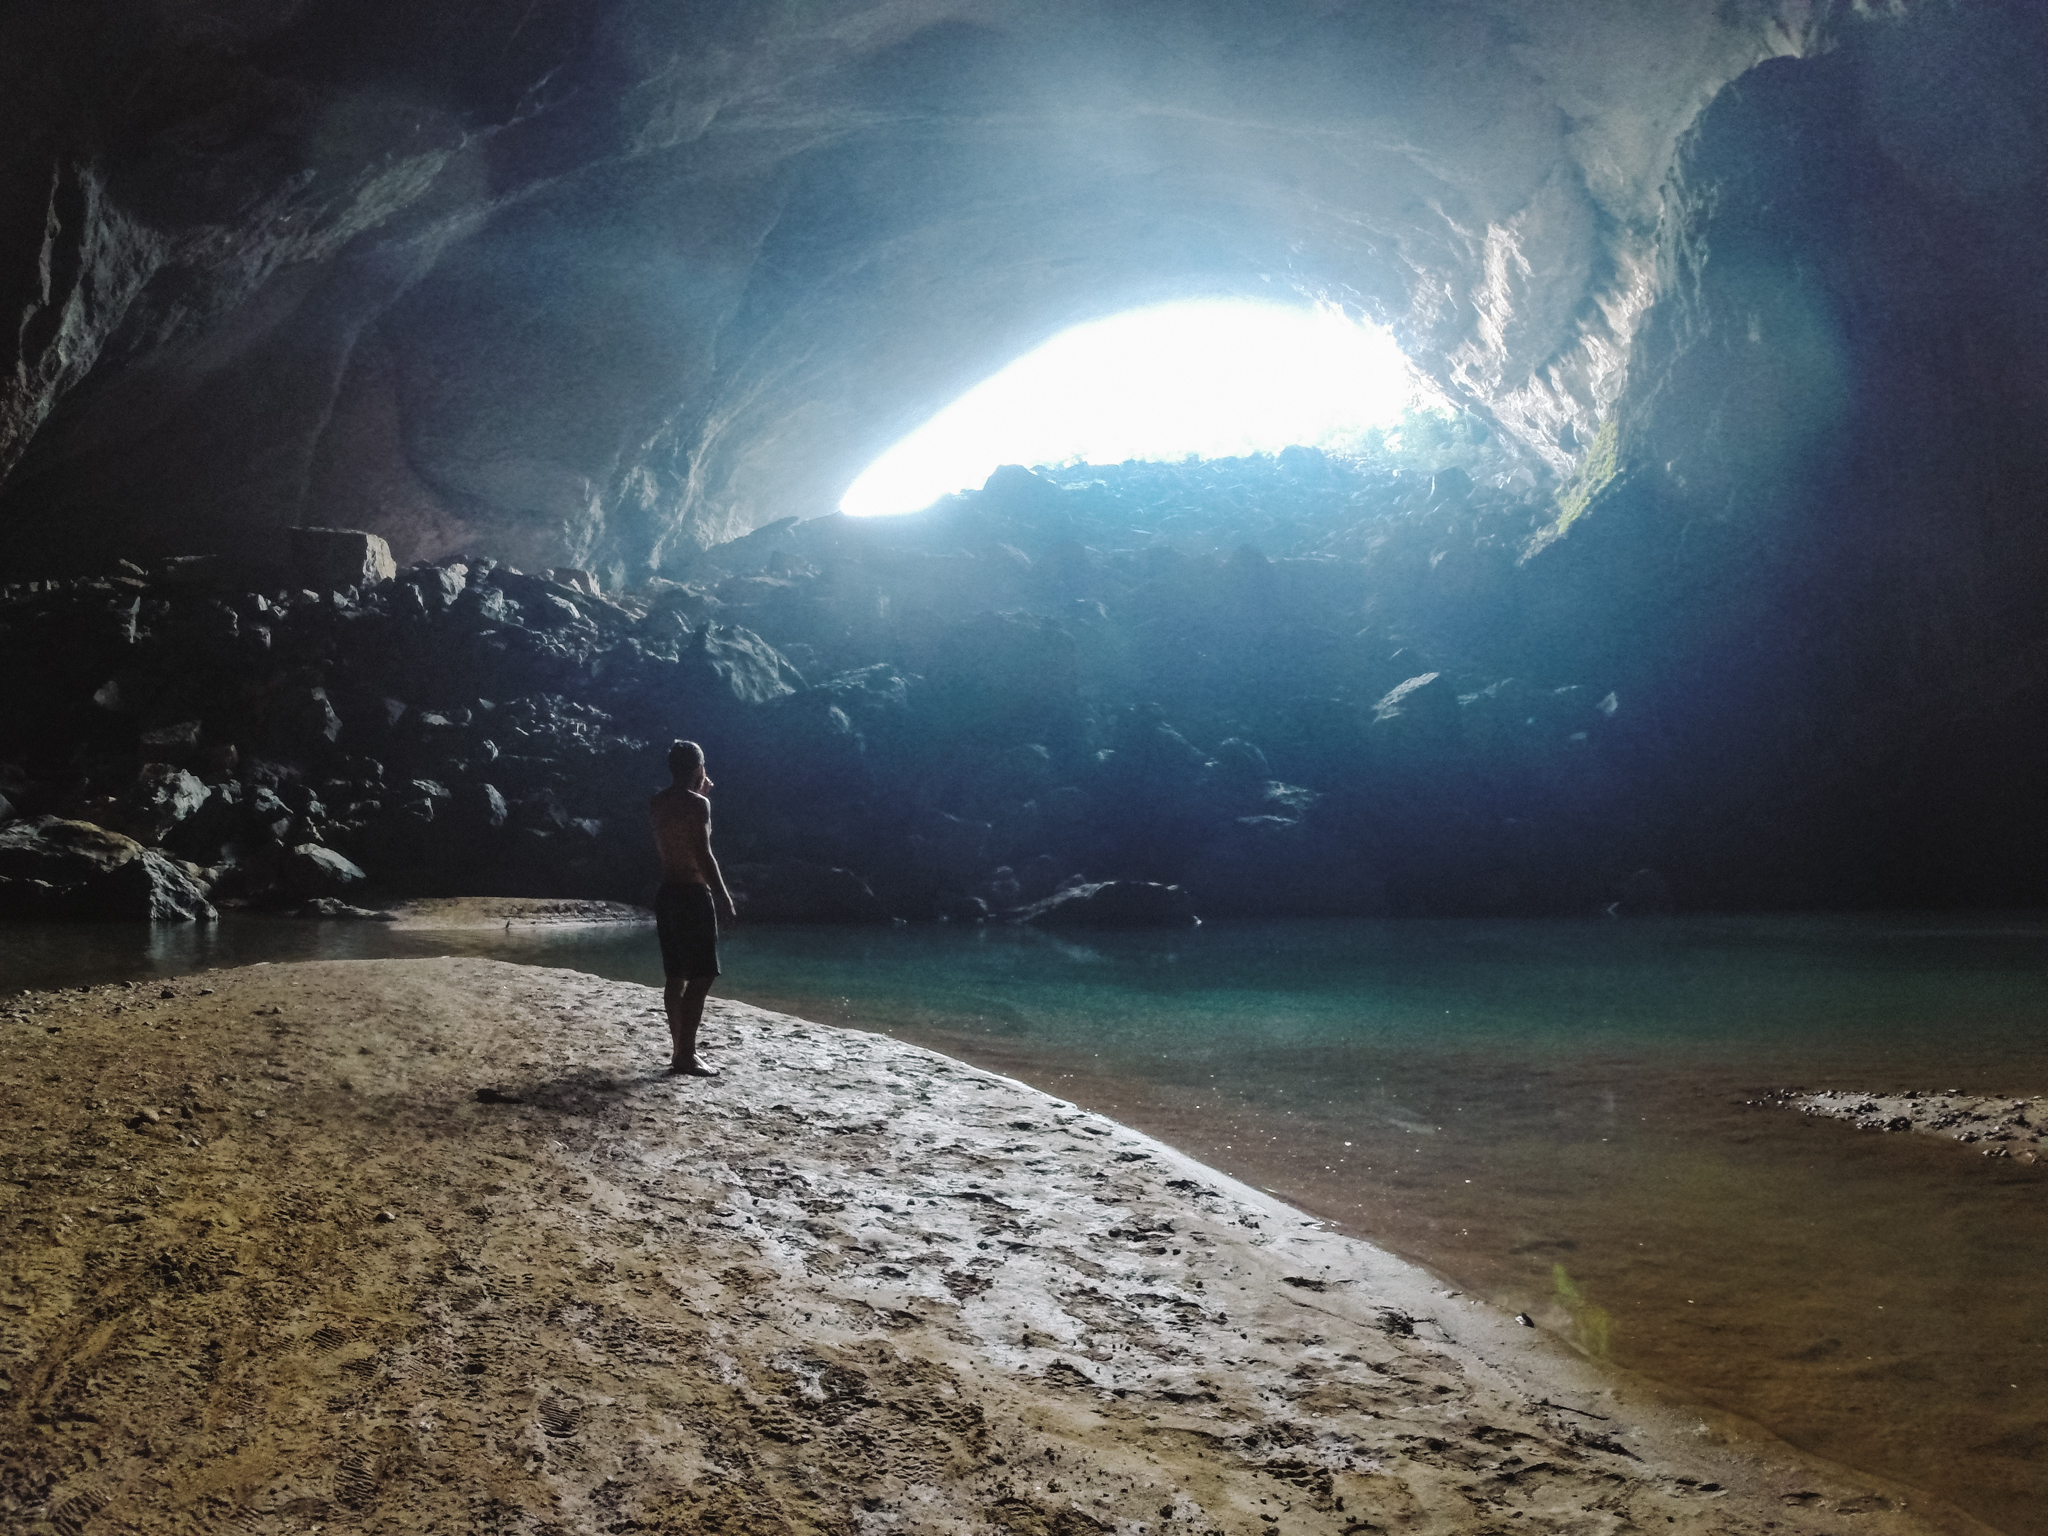 Inside The World’s Third Largest Cave